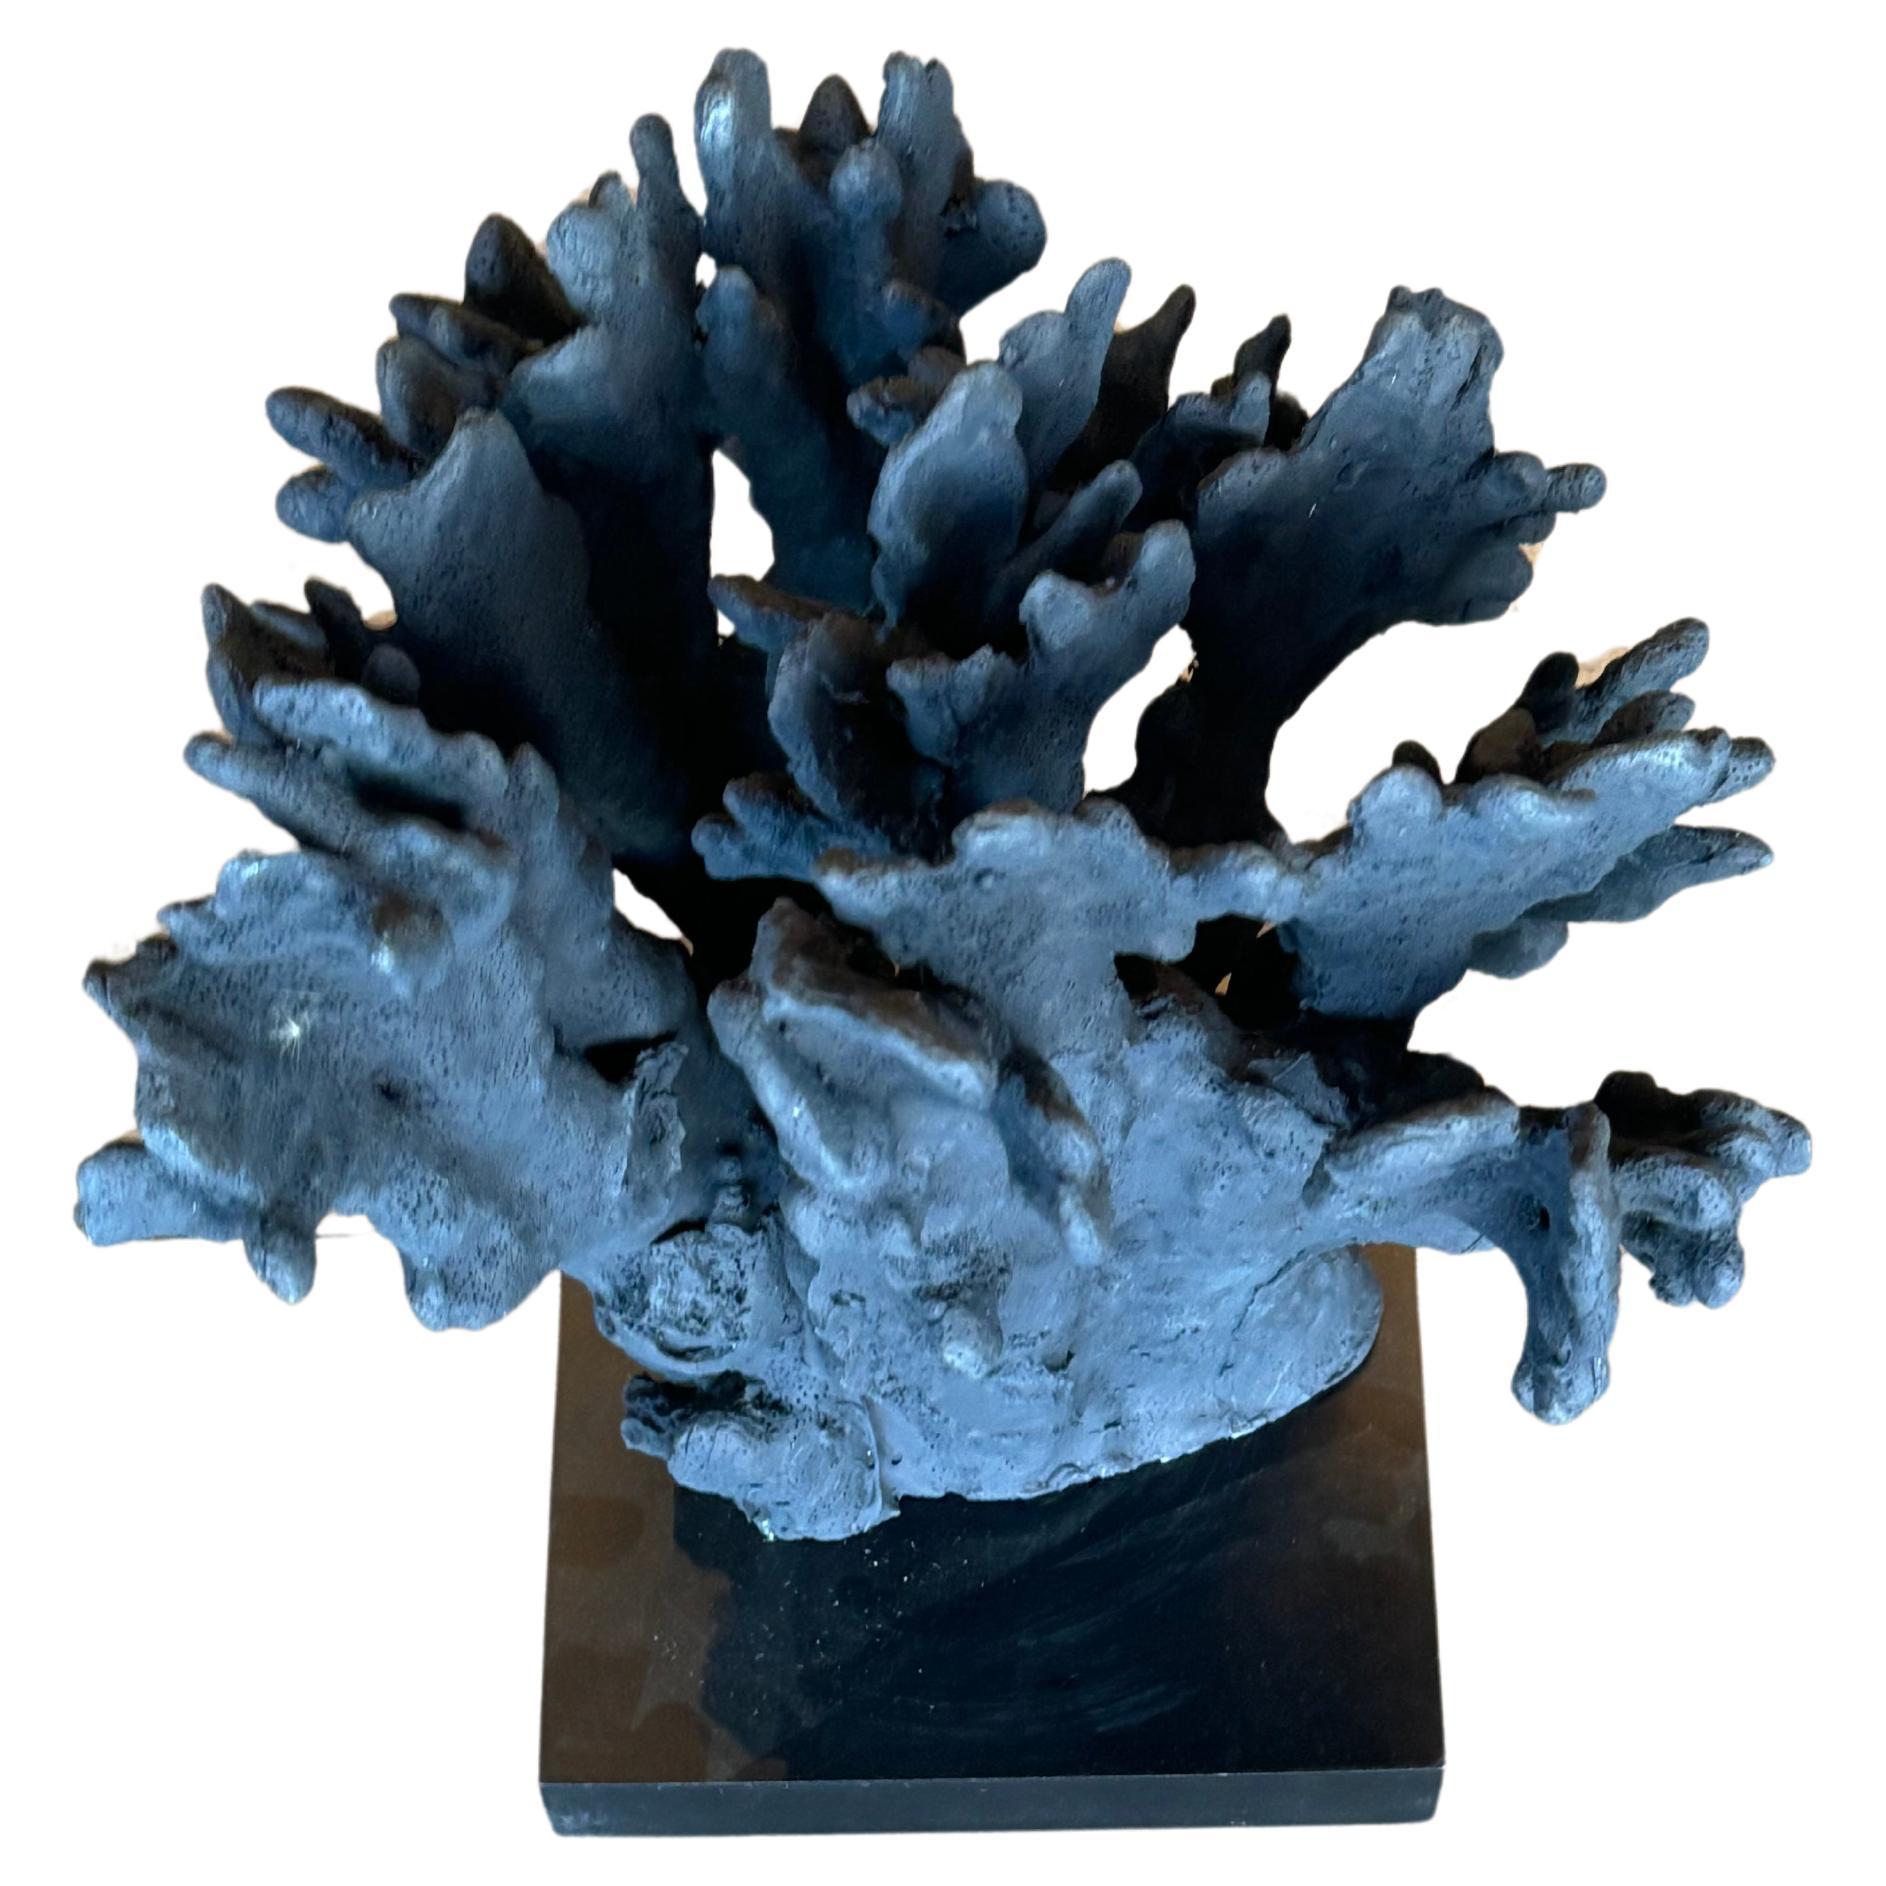 Black Parisian Coral Sourced from Paris by Martyn Lawrence Bullard
Ideal for decorative use, bookends, or as a case piece